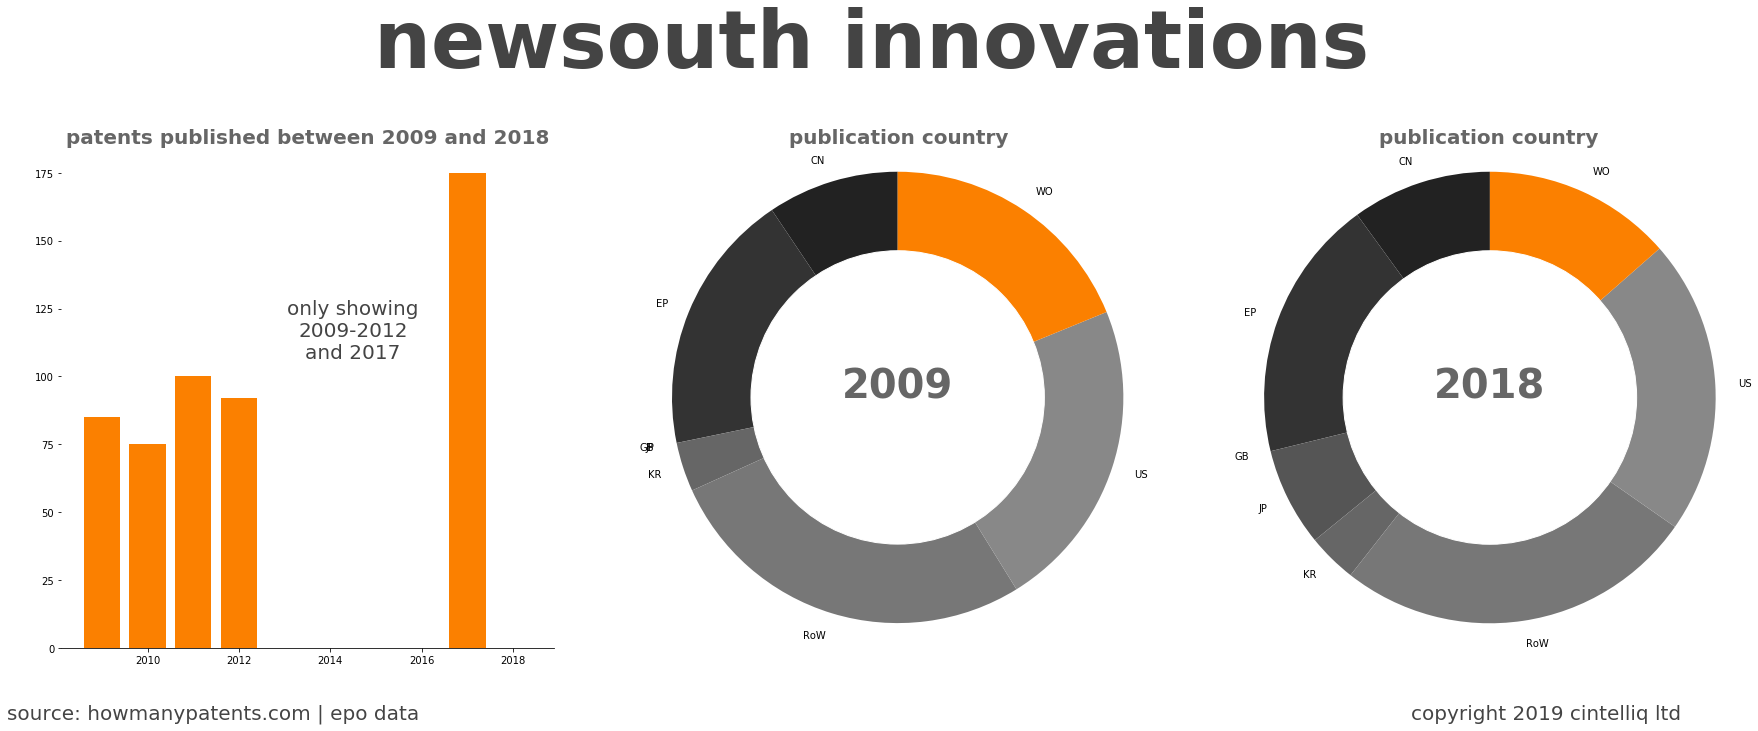 summary of patents for Newsouth Innovations